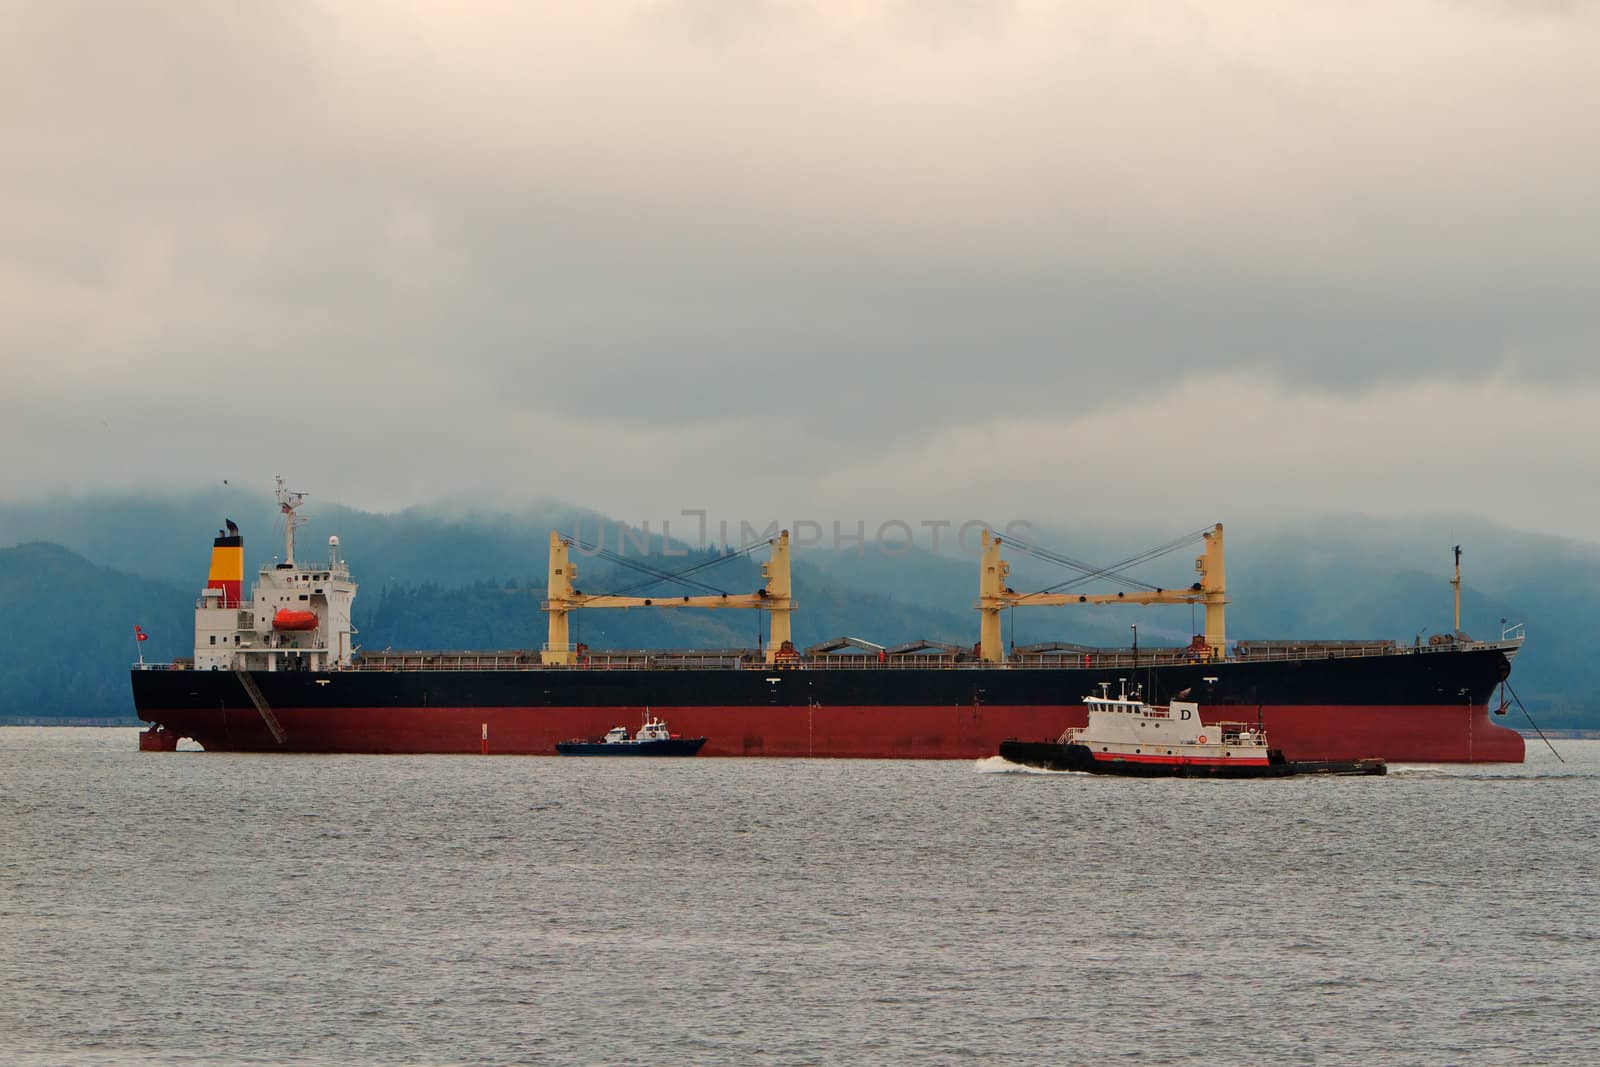 Freighter ship tug and pilot vessel at mouth of the columbia river